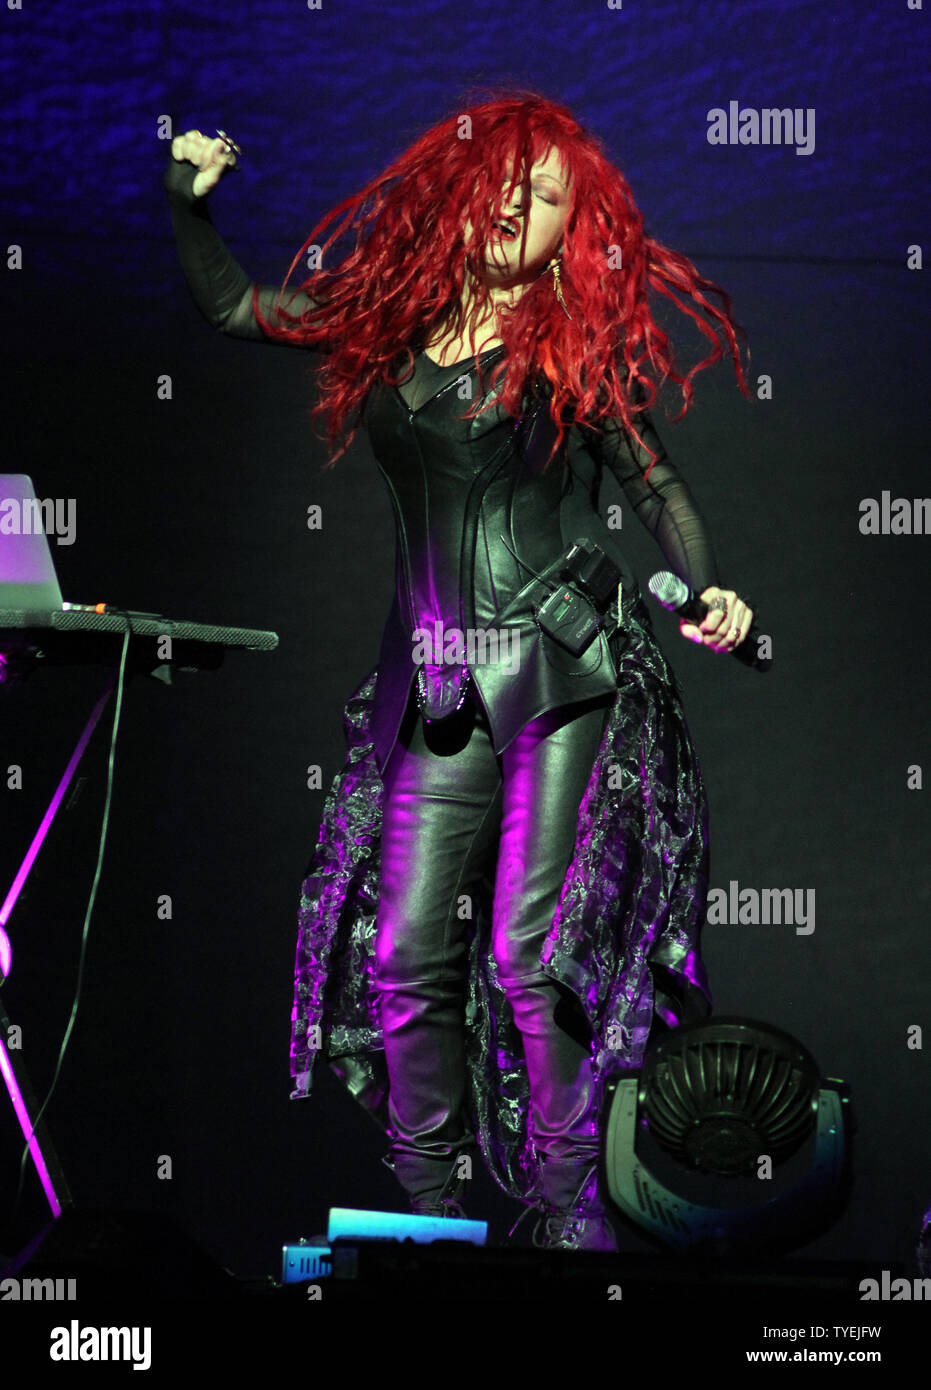 Cyndi Lauper performs in concert opening for Cher on her 'D2K Tour', at the BB & T Center in Sunrise, Florida on May 17, 2014.  UPI/Michael Bush Stock Photo